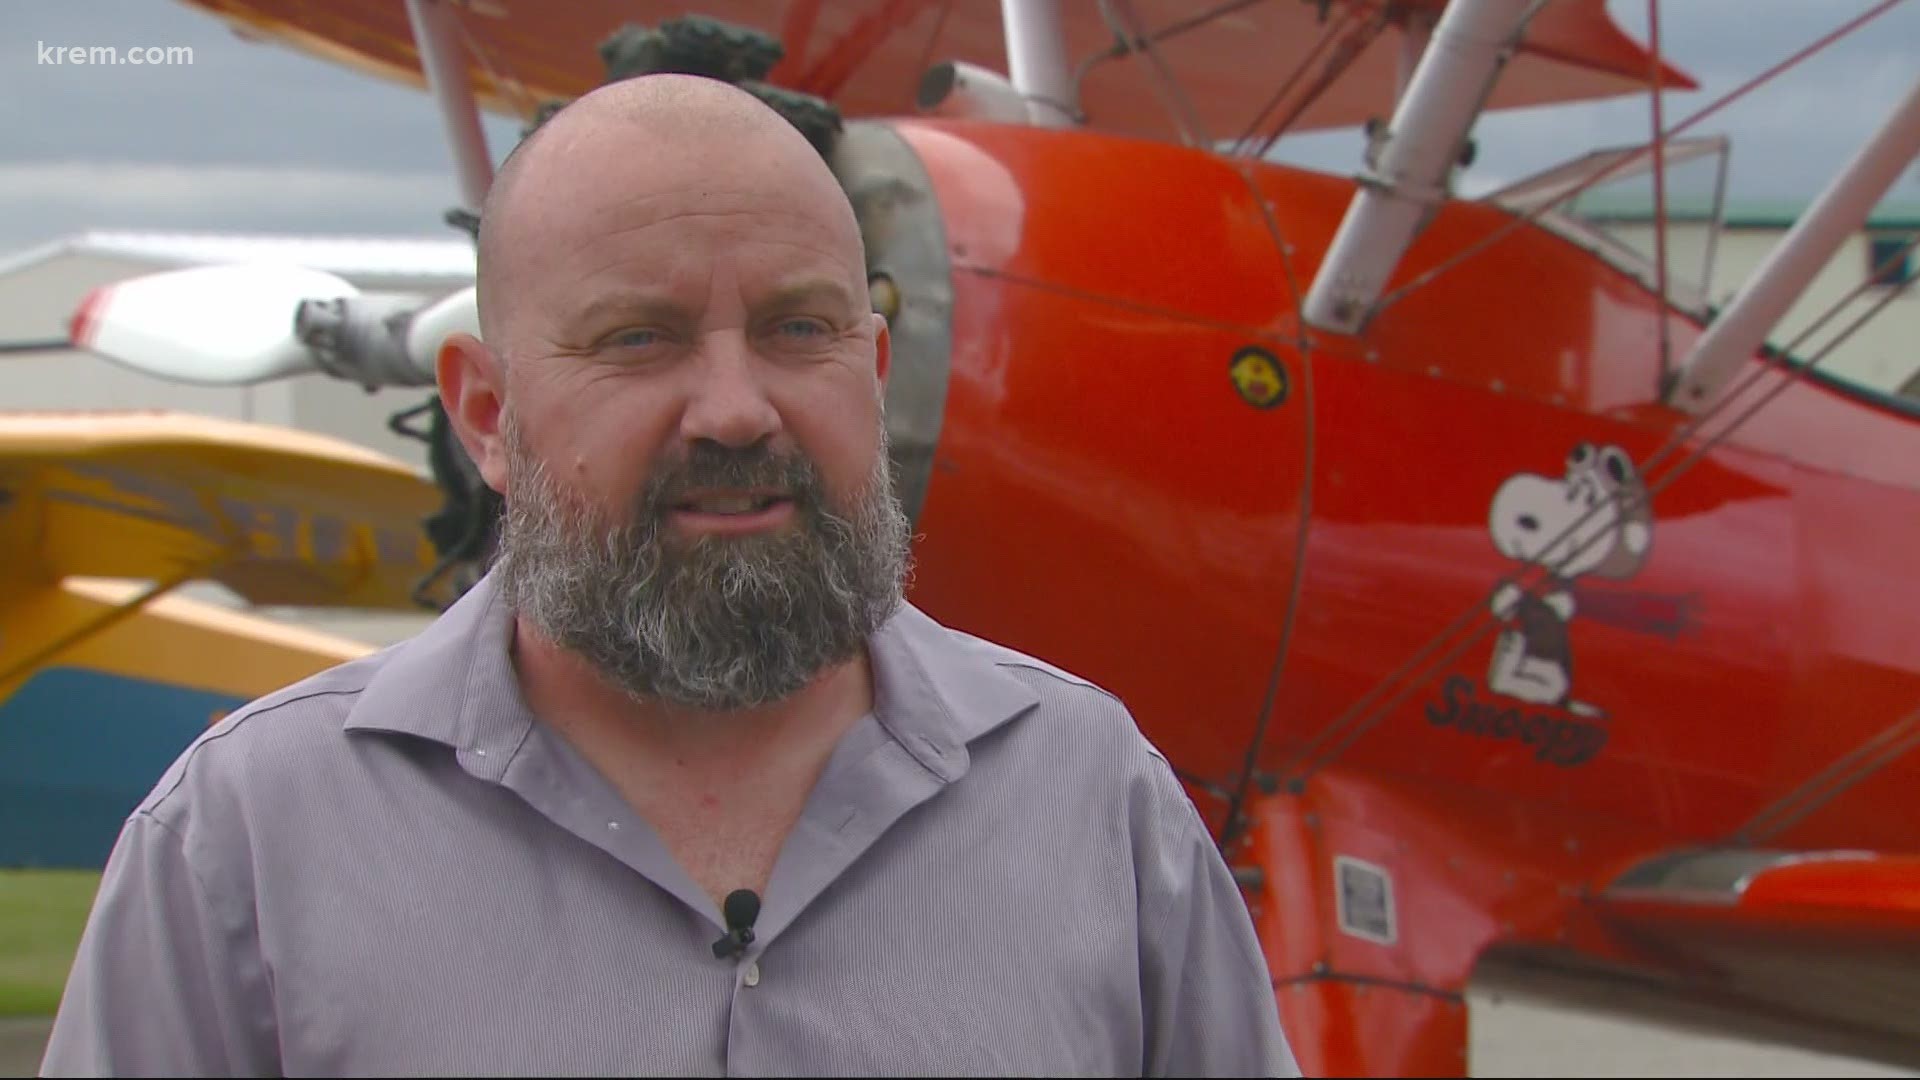 Shane Rogers, owner of No Limits Aviation, is buying Brooks Seaplanes and hopes to have it operational again this summer after last July's fatal mid-air collision.